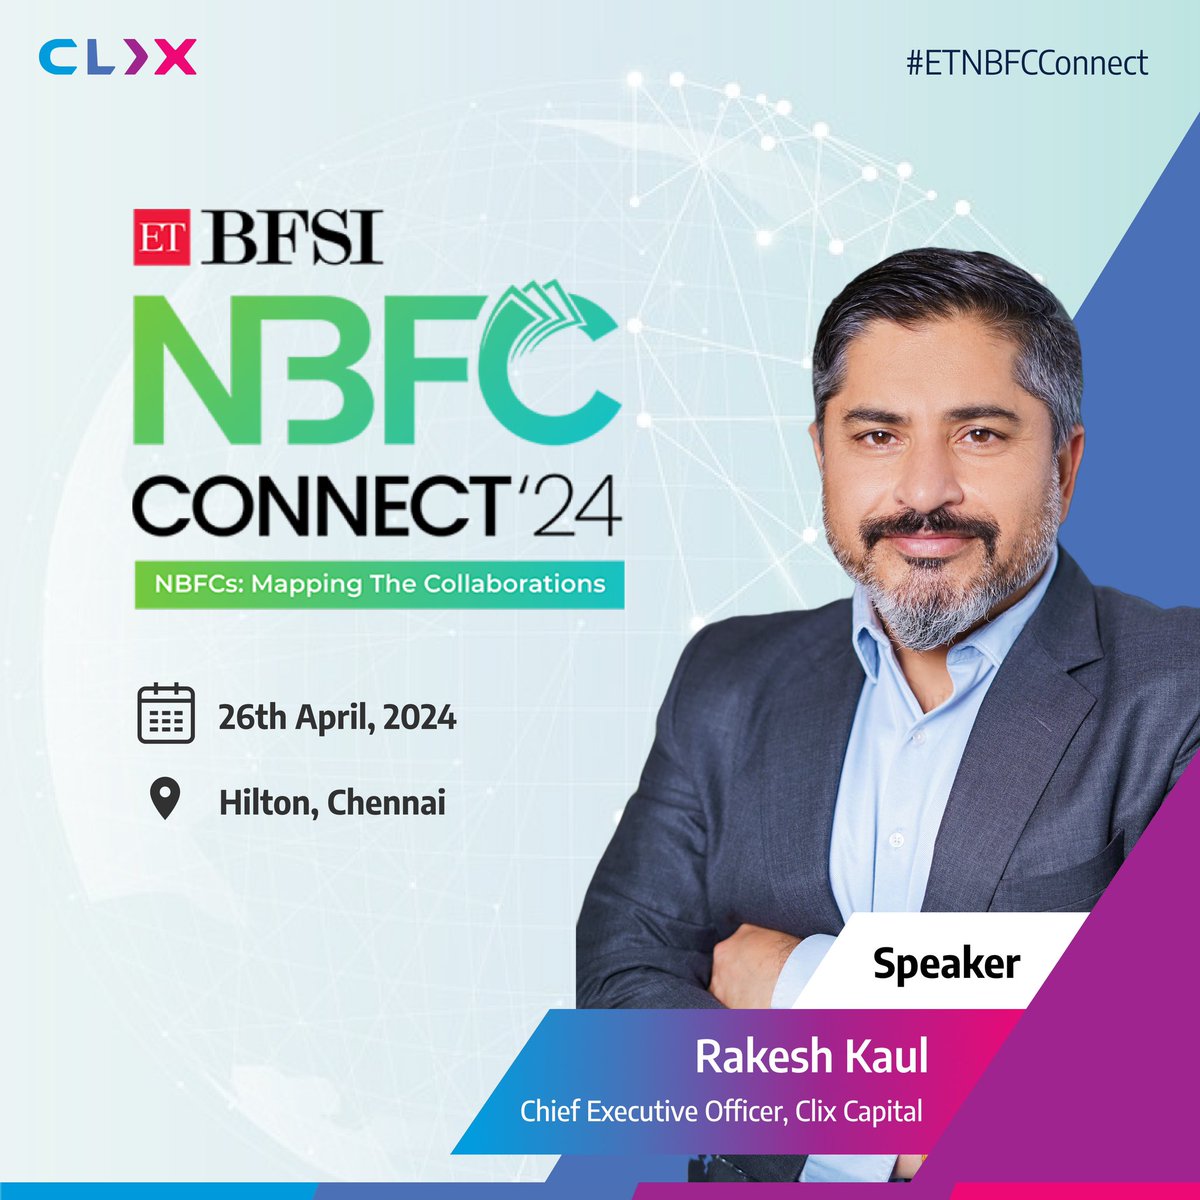 Our CEO, Rakesh Kaul, along with industry leaders, discusses 'Co-Lending: Driving Growth in Banking & NBFCs' at ET BFSI NBFC Connect 2024 in Chennai today. 

@ETBFSI 

#PanelDiscussion #Leadership #Fintech #ETBFSI #ETNBFCConnect #Chennai2024 #BFSIEvent